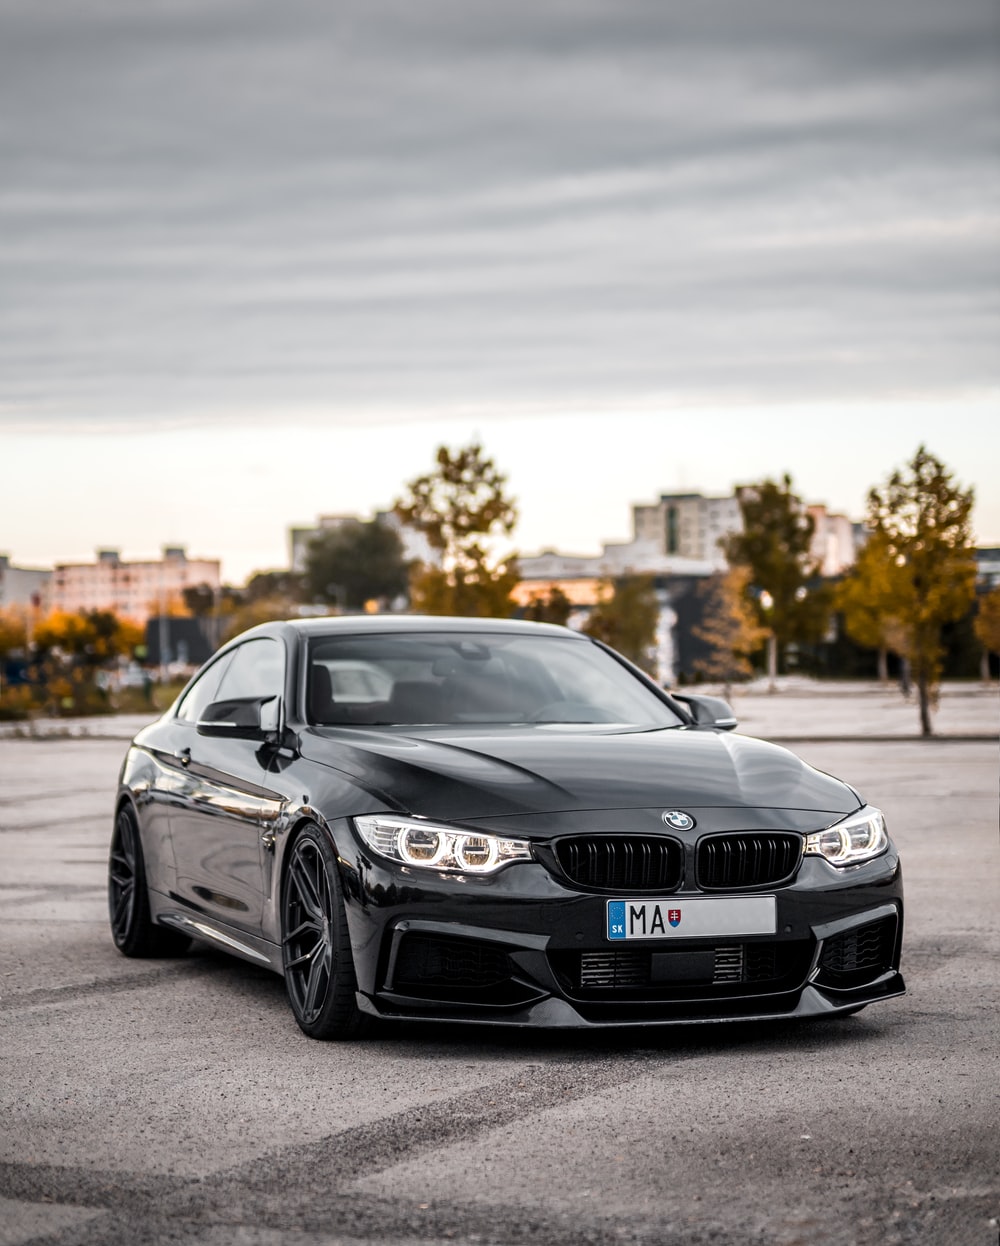 Car Bmw Picture. Download Free Image